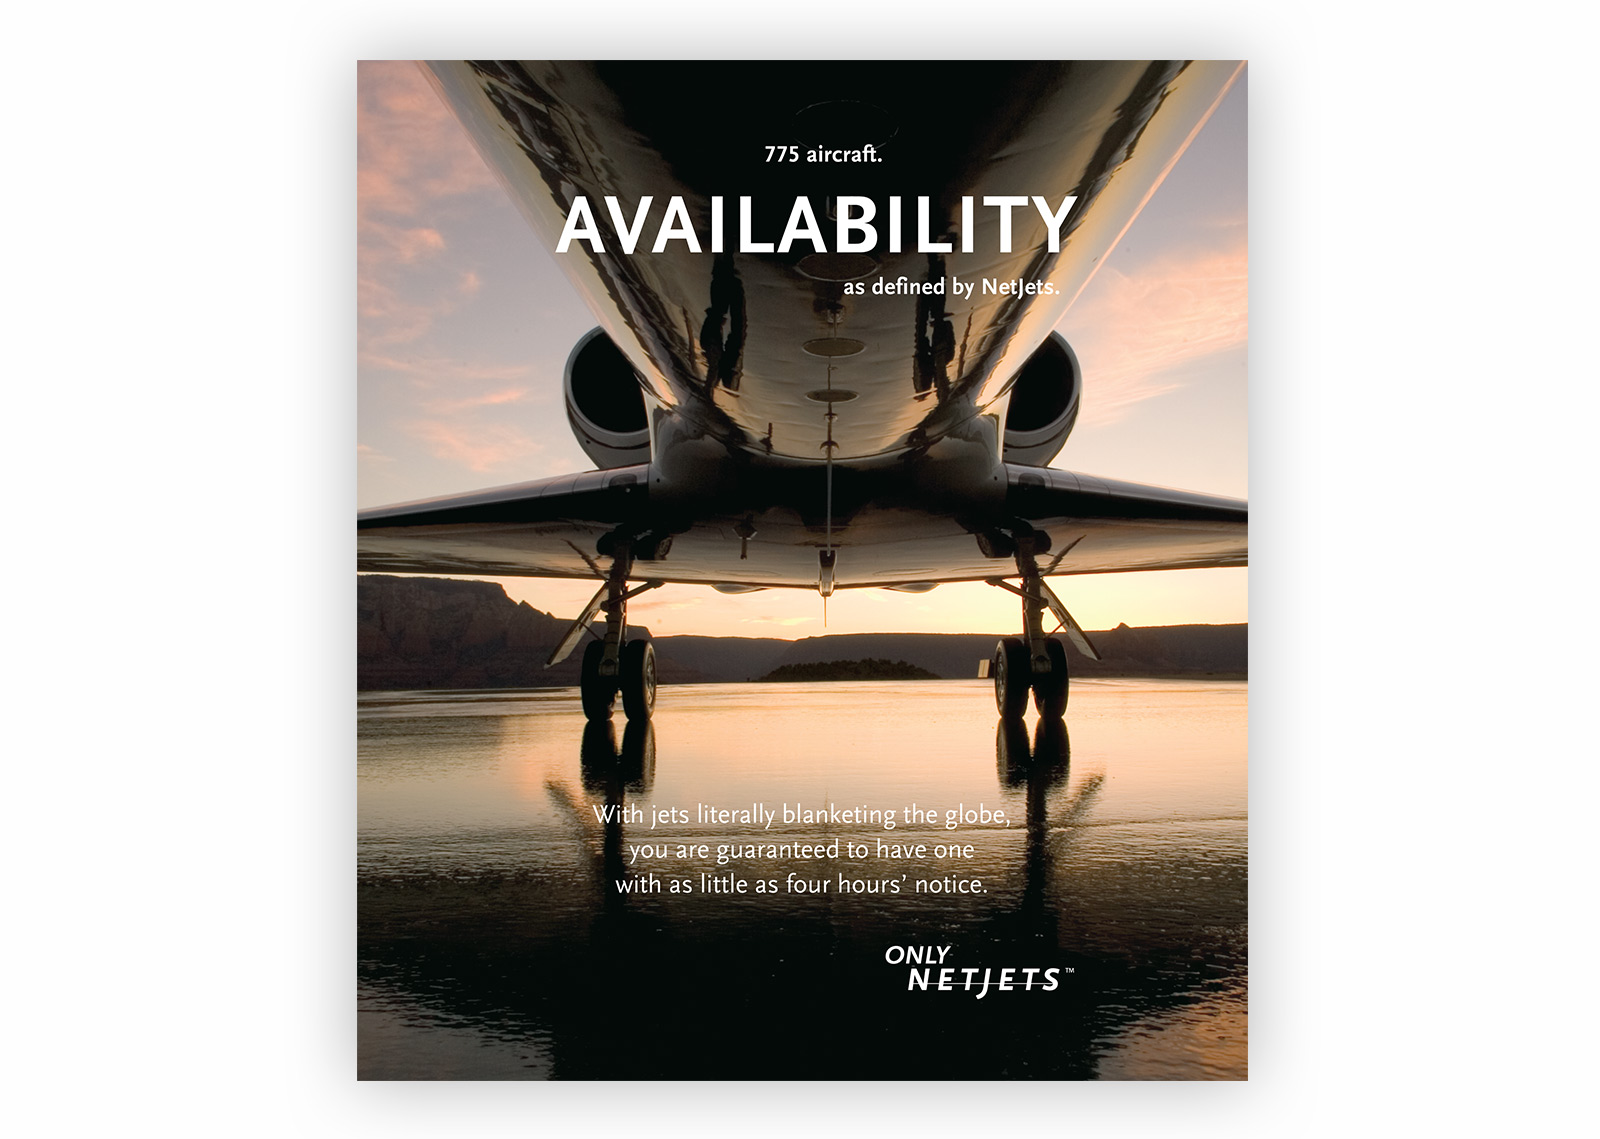 This image depicts a project for NetJets